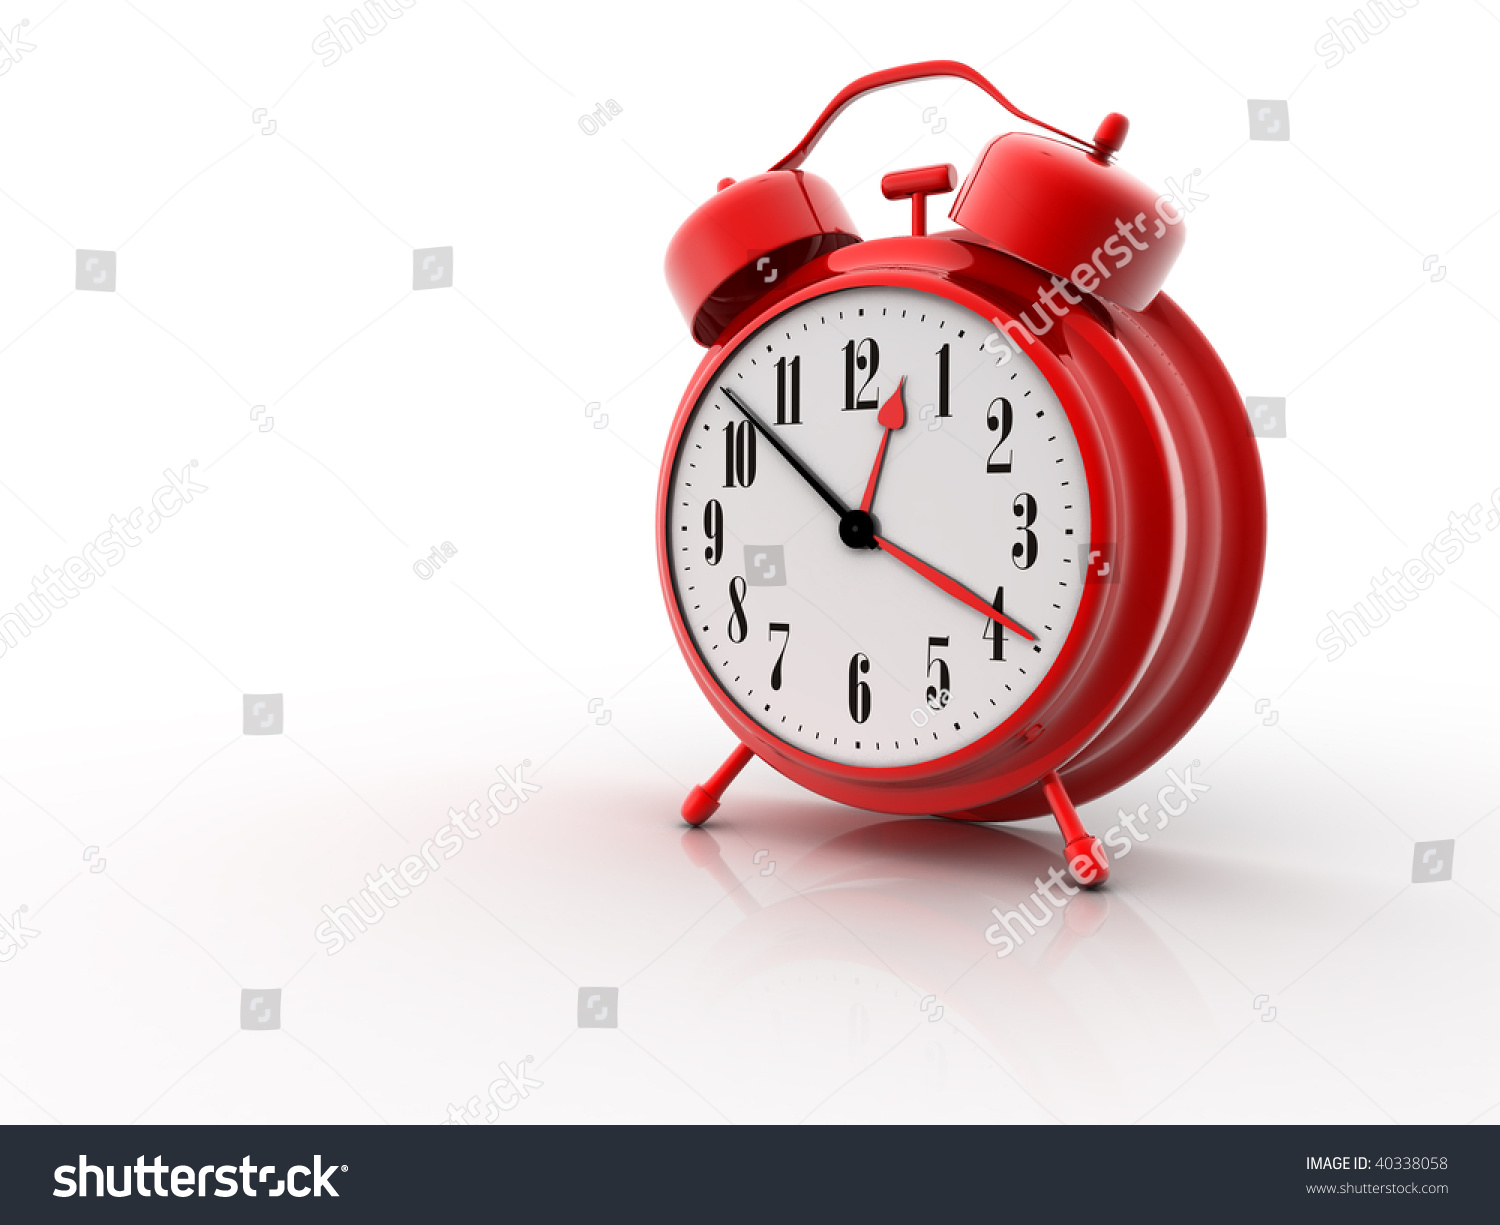 Red Classic Alarm Clock On White Background - 3d Render Stock Photo